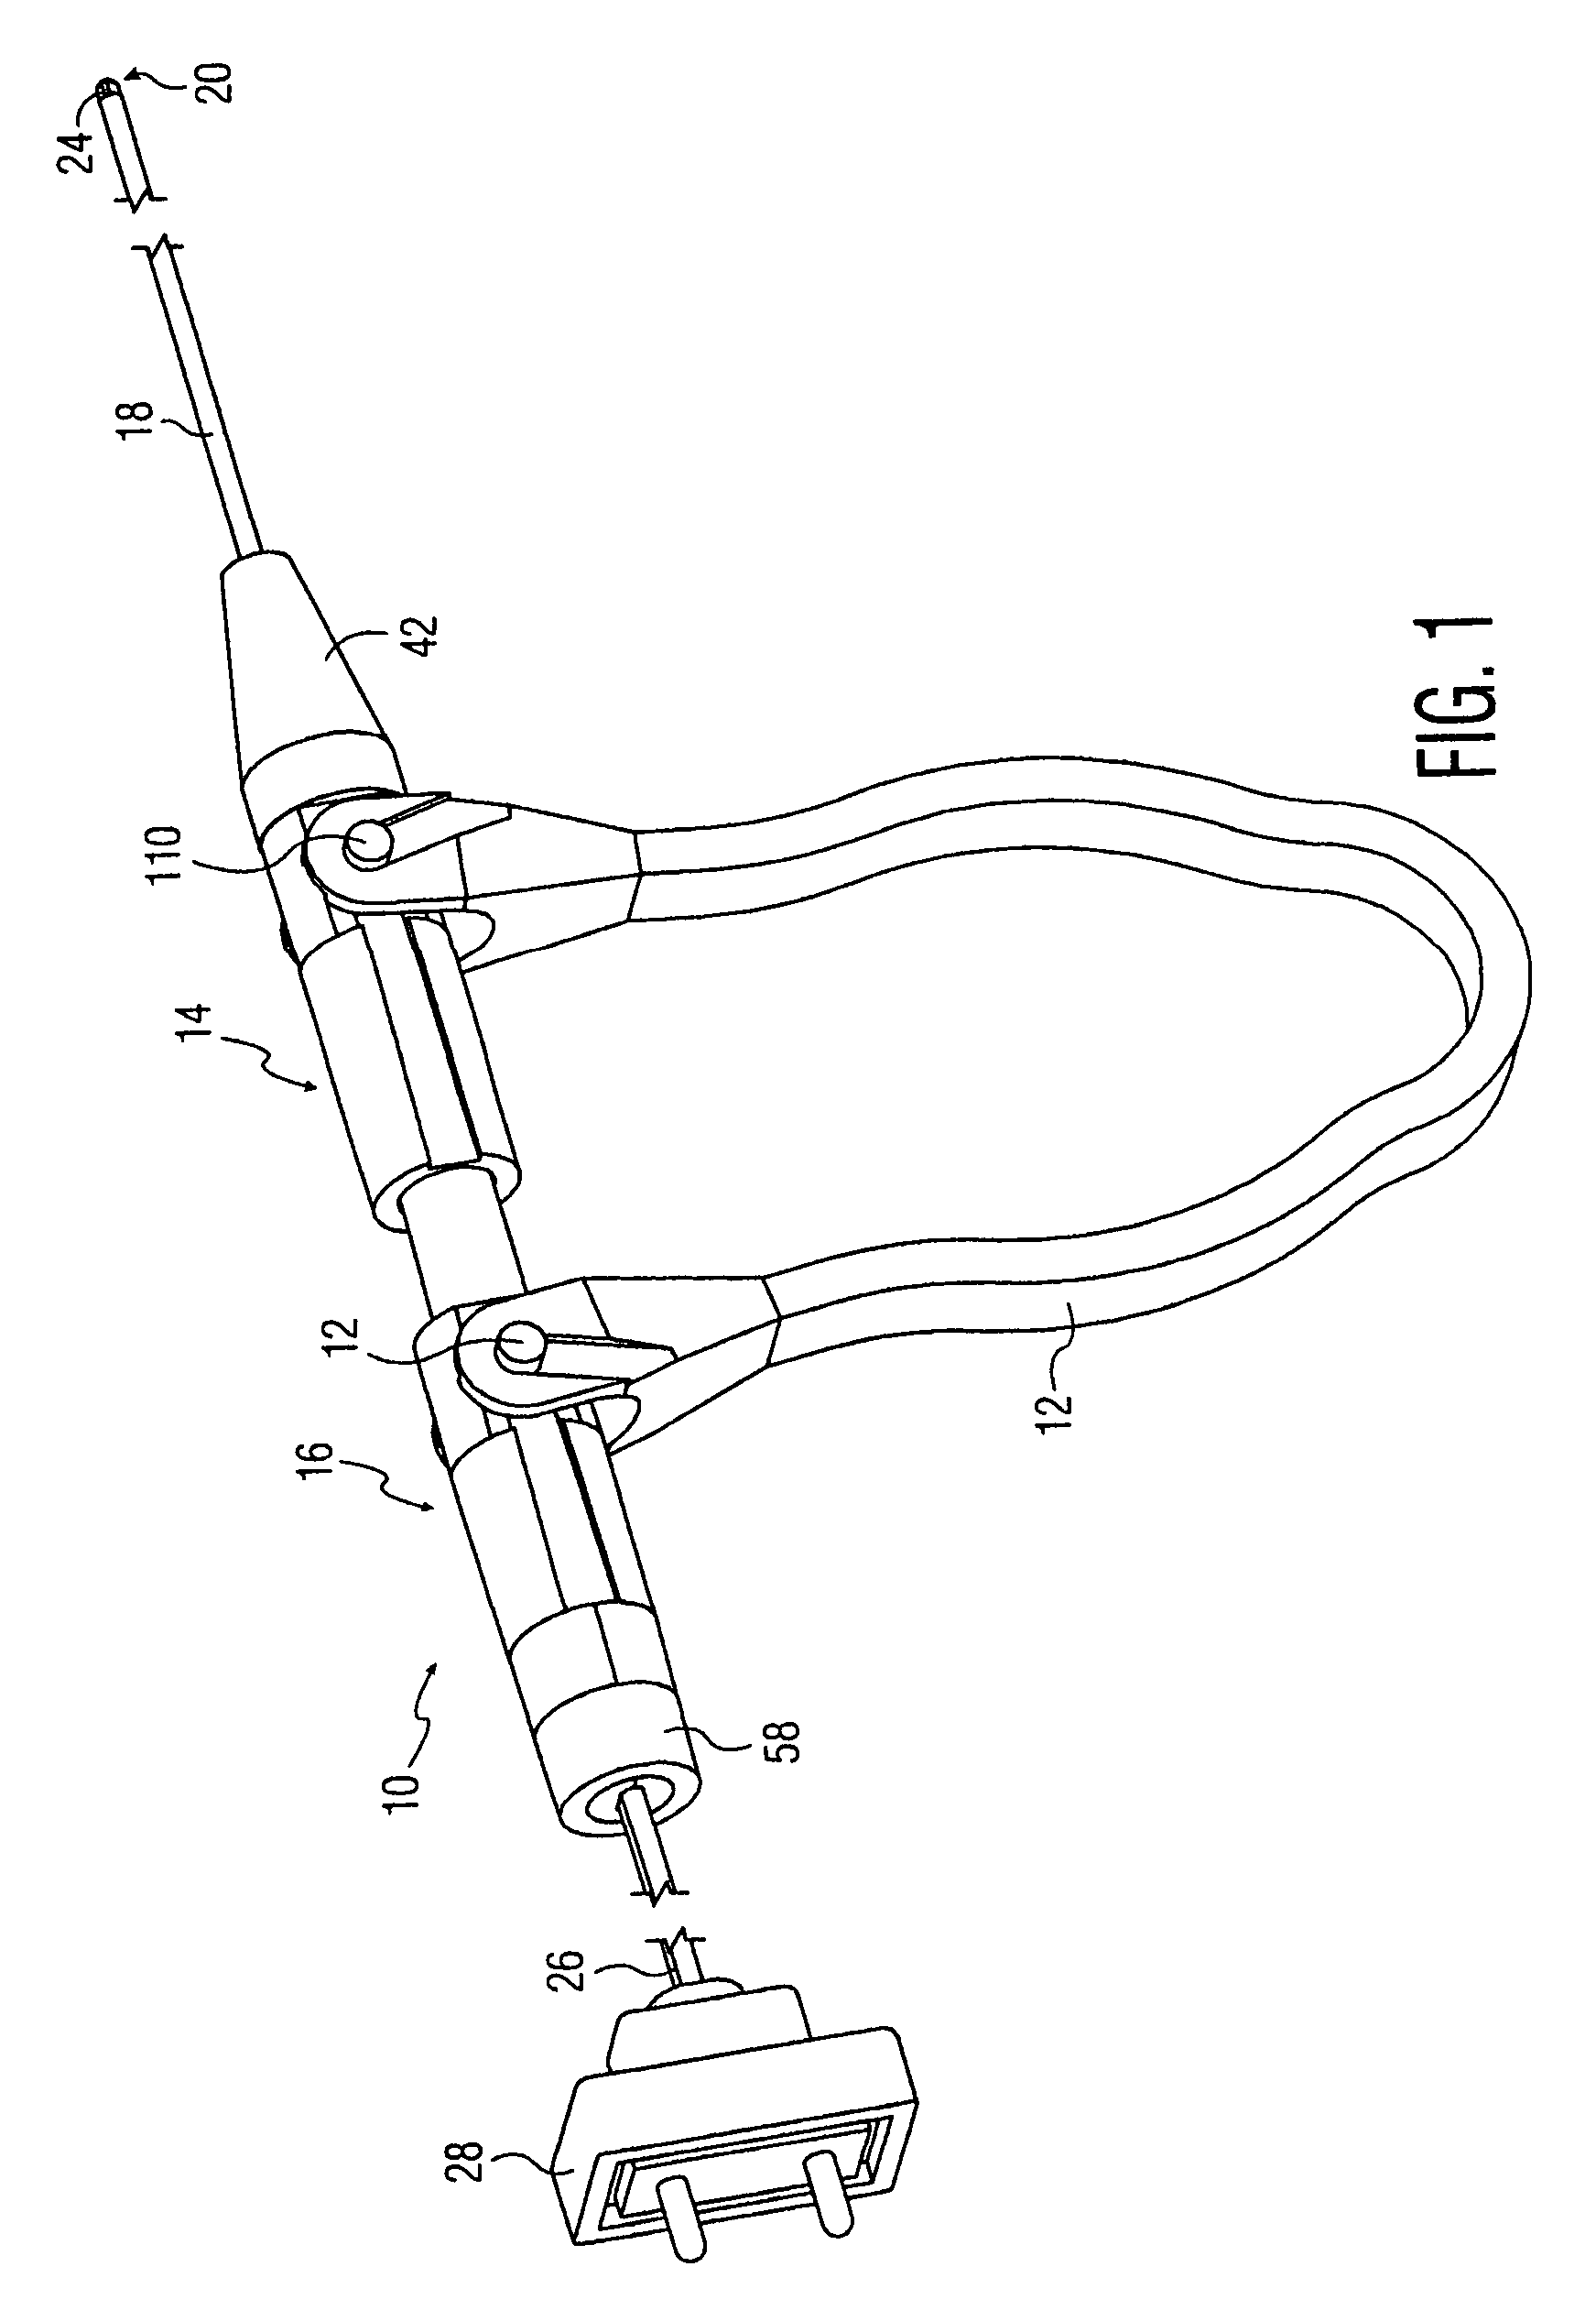 Disposable electrosurgical handpiece for treating tissue